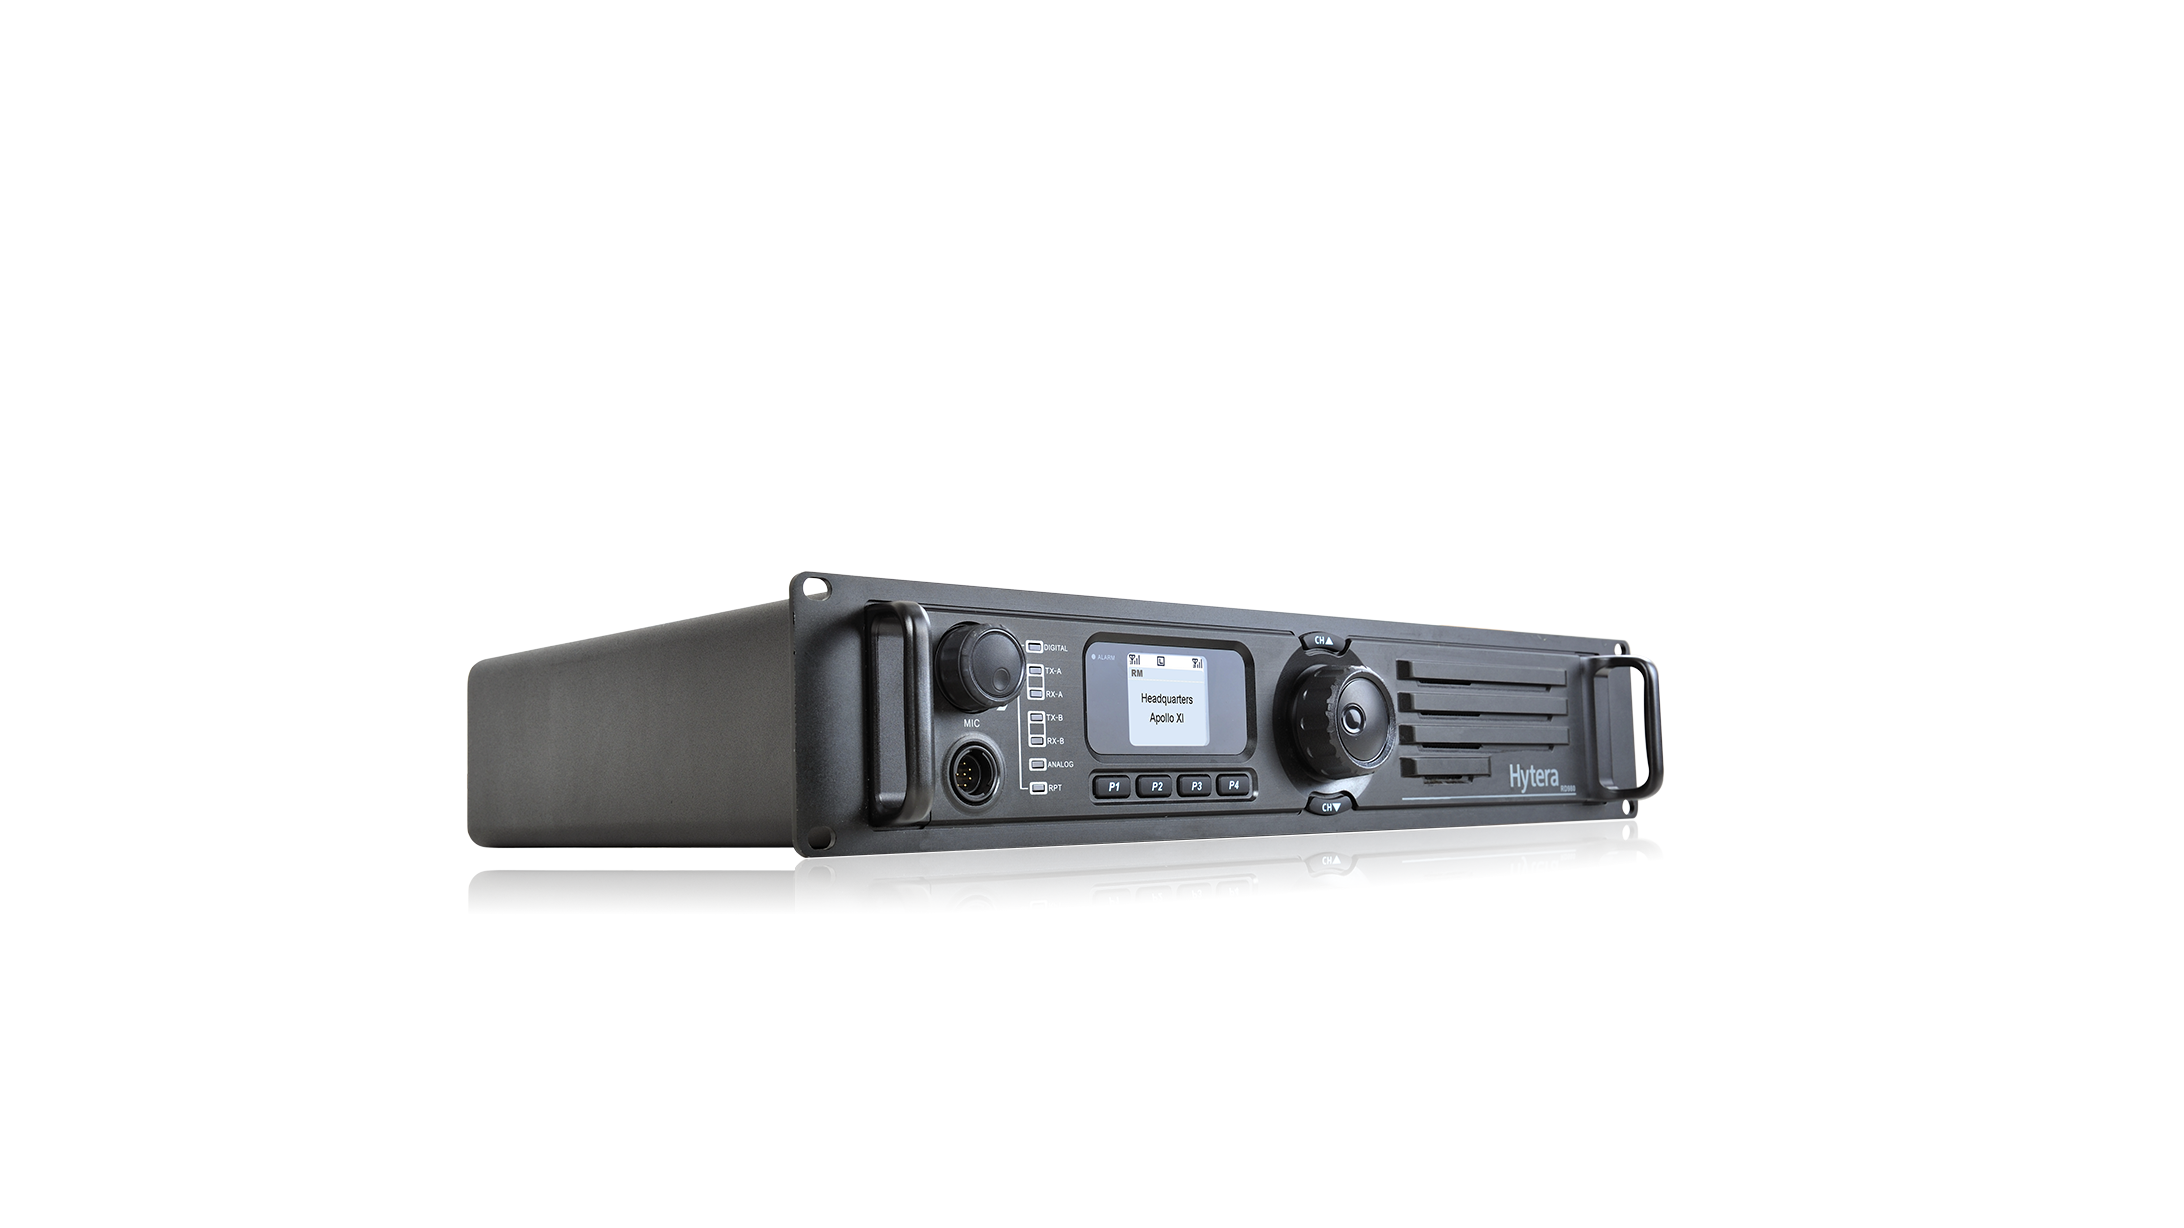 RD98XS 100W High-power DMR Repeater Pro